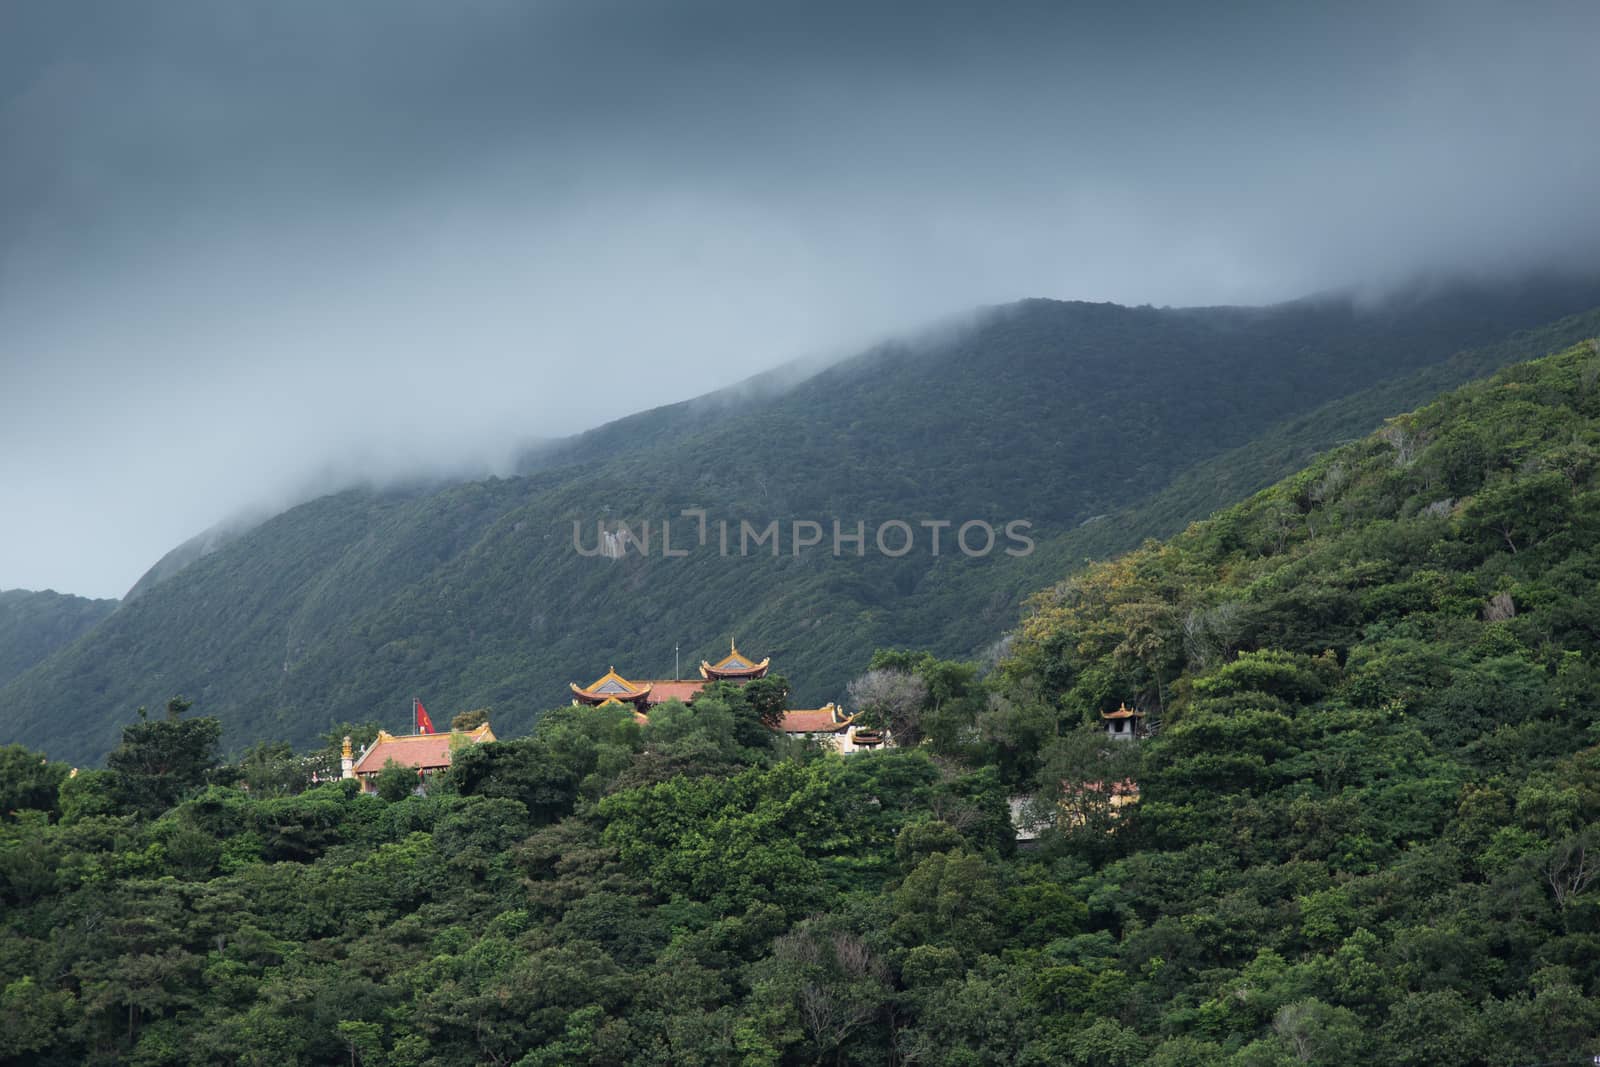 Con Dau, also known as Con Son, island from south east coast Vietnam, Van Son Pagoda in mountains with storm clouds also famous for tiger prisons used by French and Americans. High quality photo